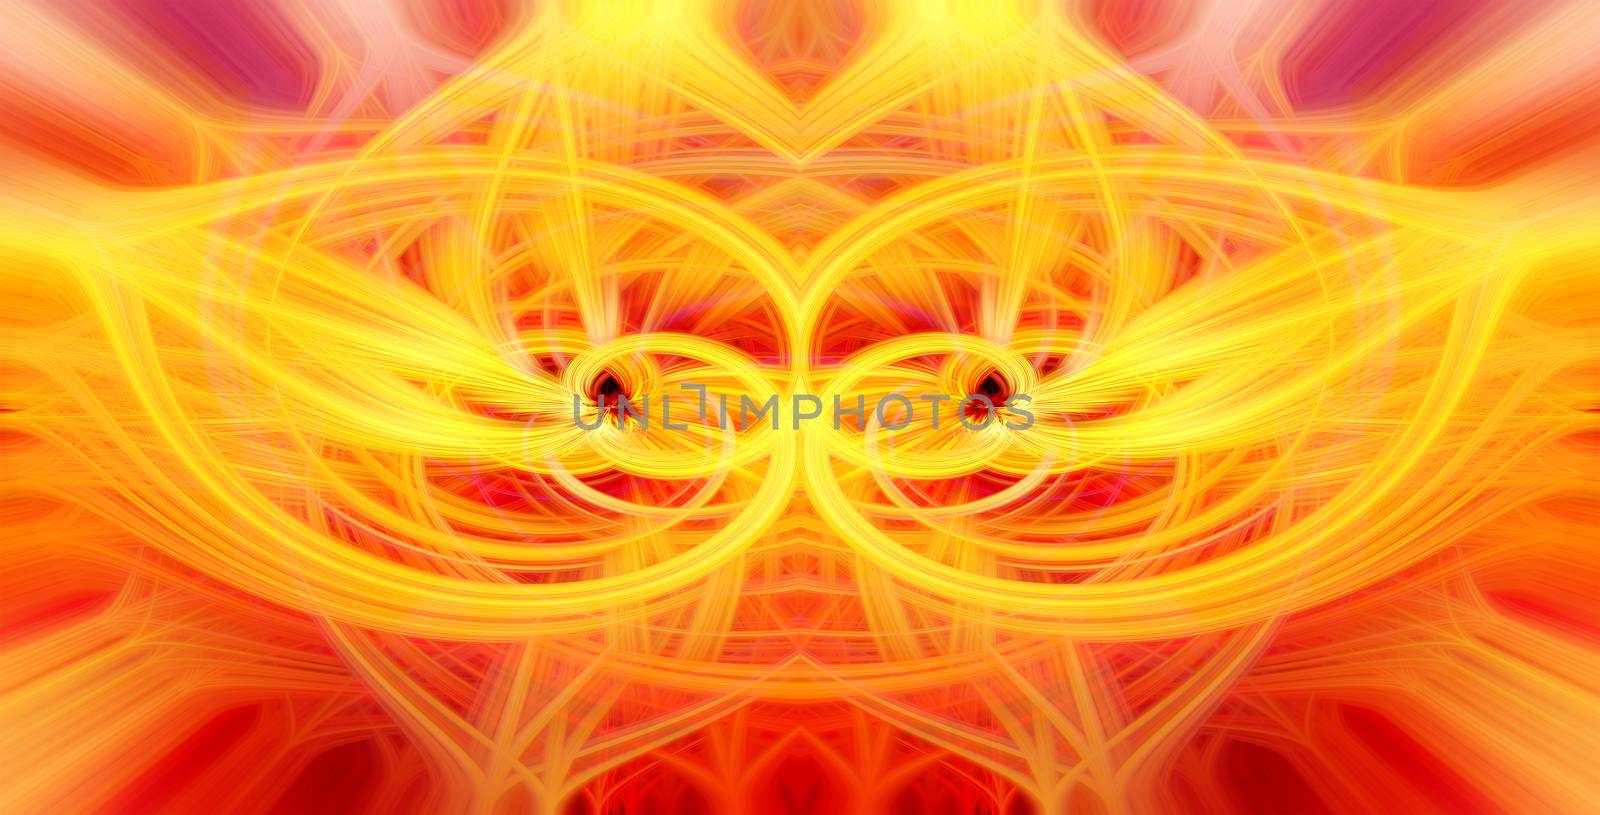 Beautiful abstract intertwined glowing 3d fibers forming a shape of sparkle, flame, flower, interlinked hearts. Yellow, orange, and red colors. Illustration.